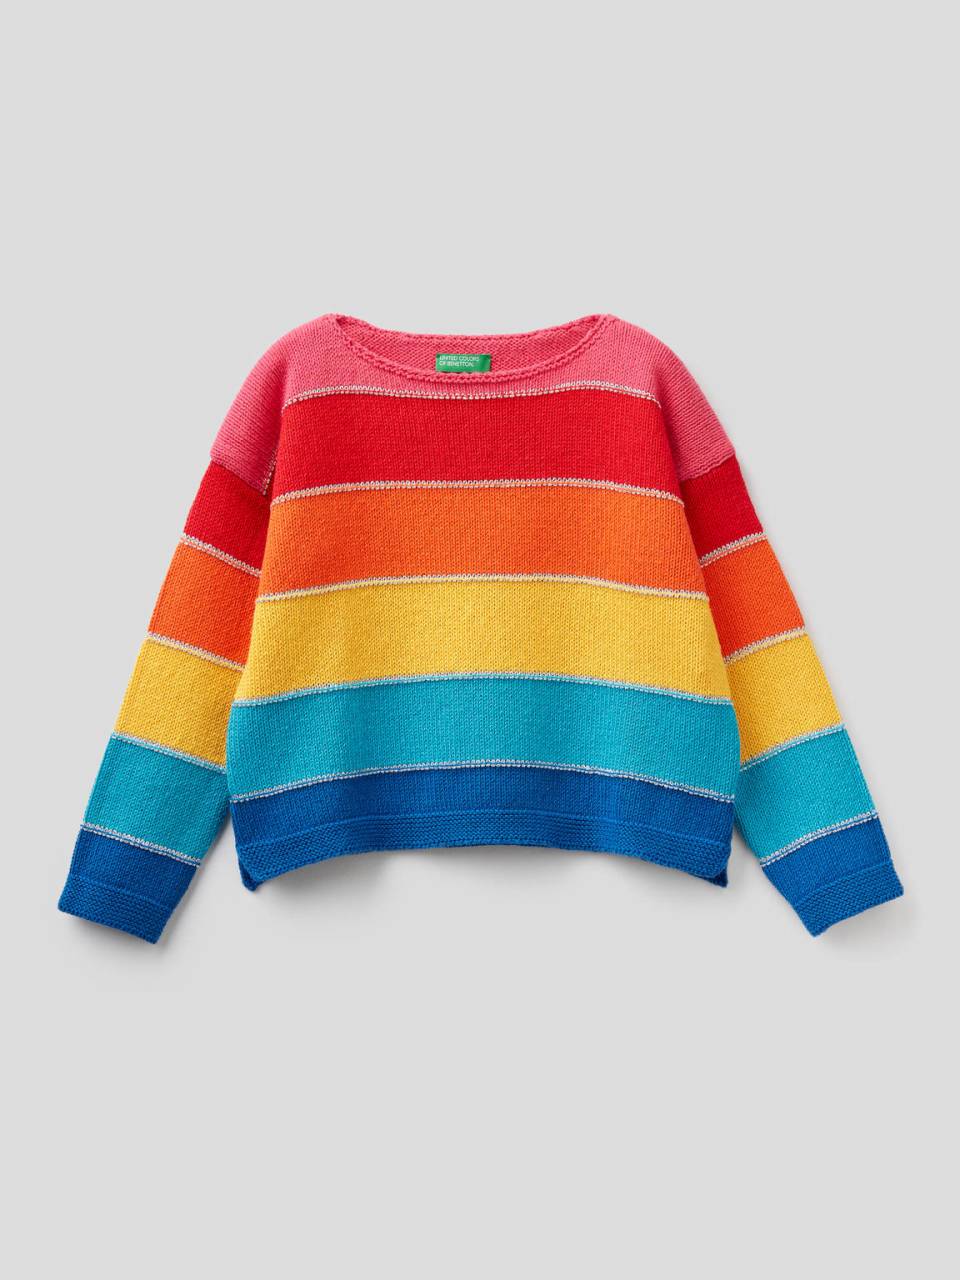 Benetton Sweater with striped knit. 1